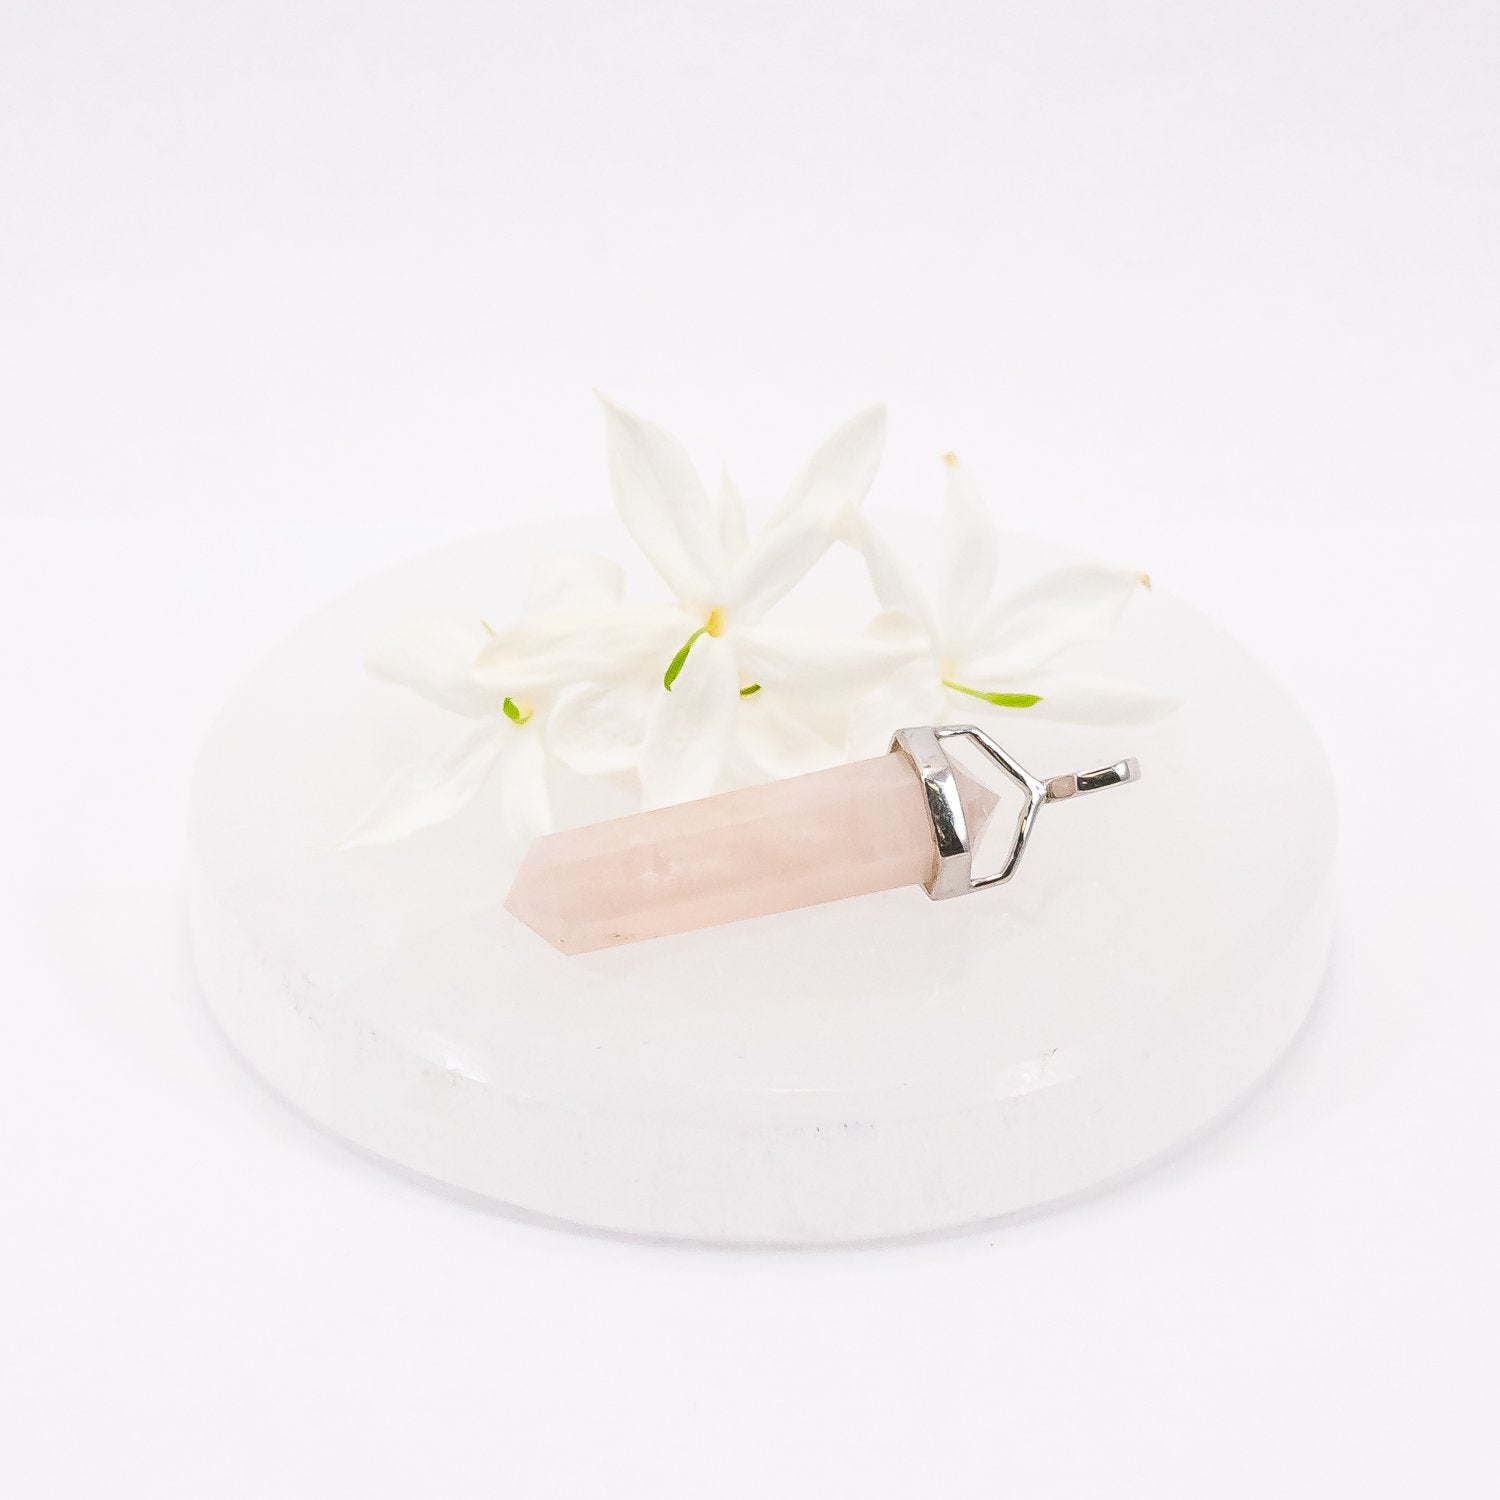 Morganite crystal pendant necklace on selenite plate with flowers.